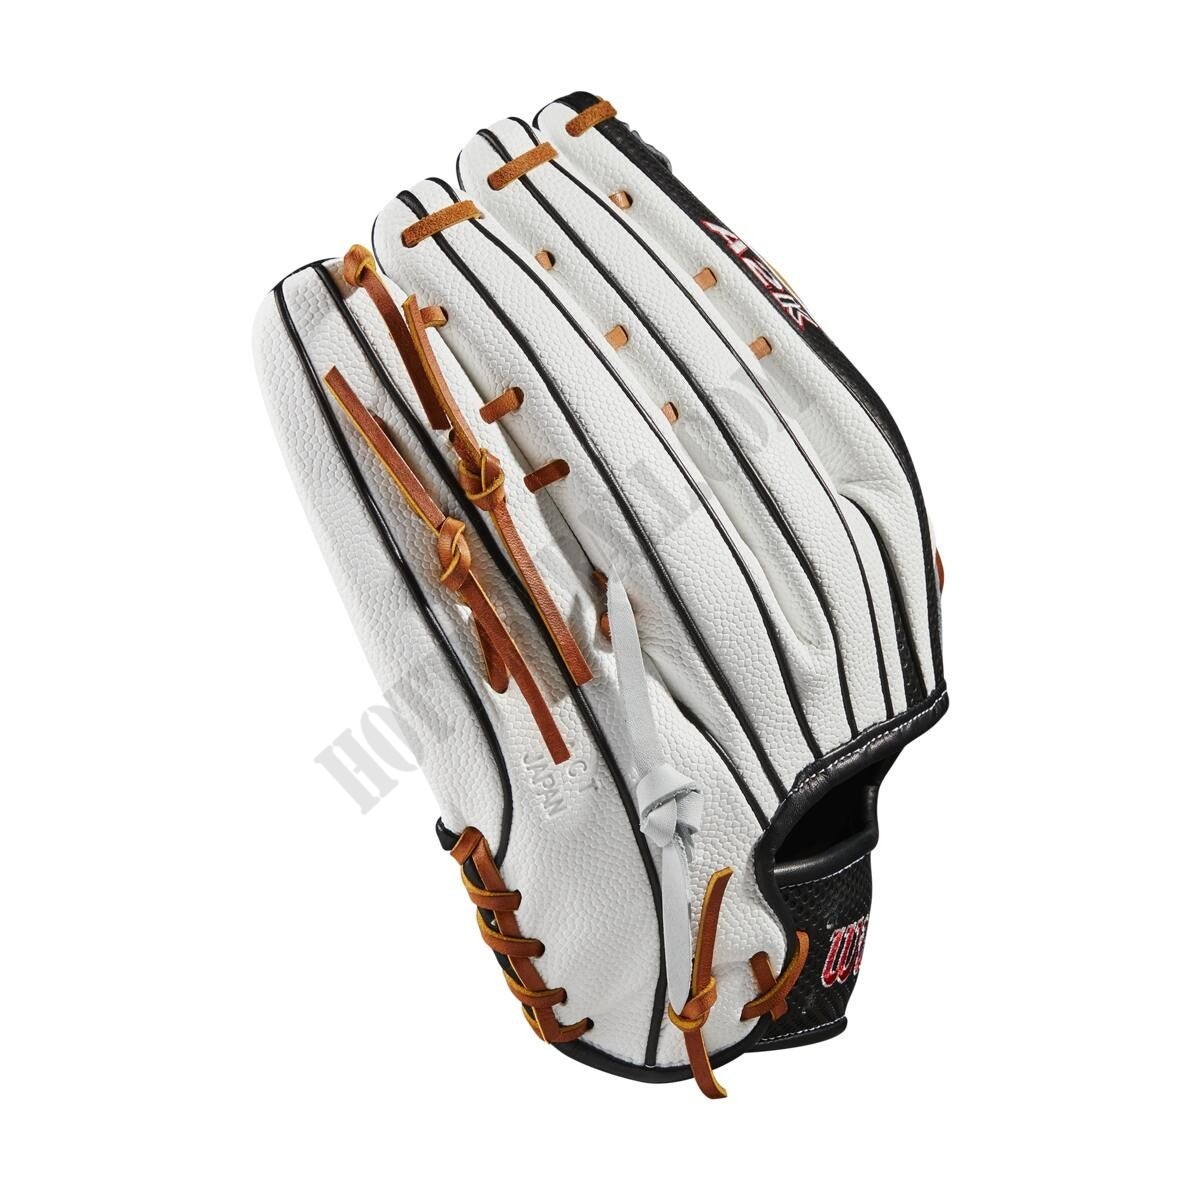 2021 A2K SC1775SS 12.75" Outfield Baseball Glove - Limited Edition ● Wilson Promotions - -4